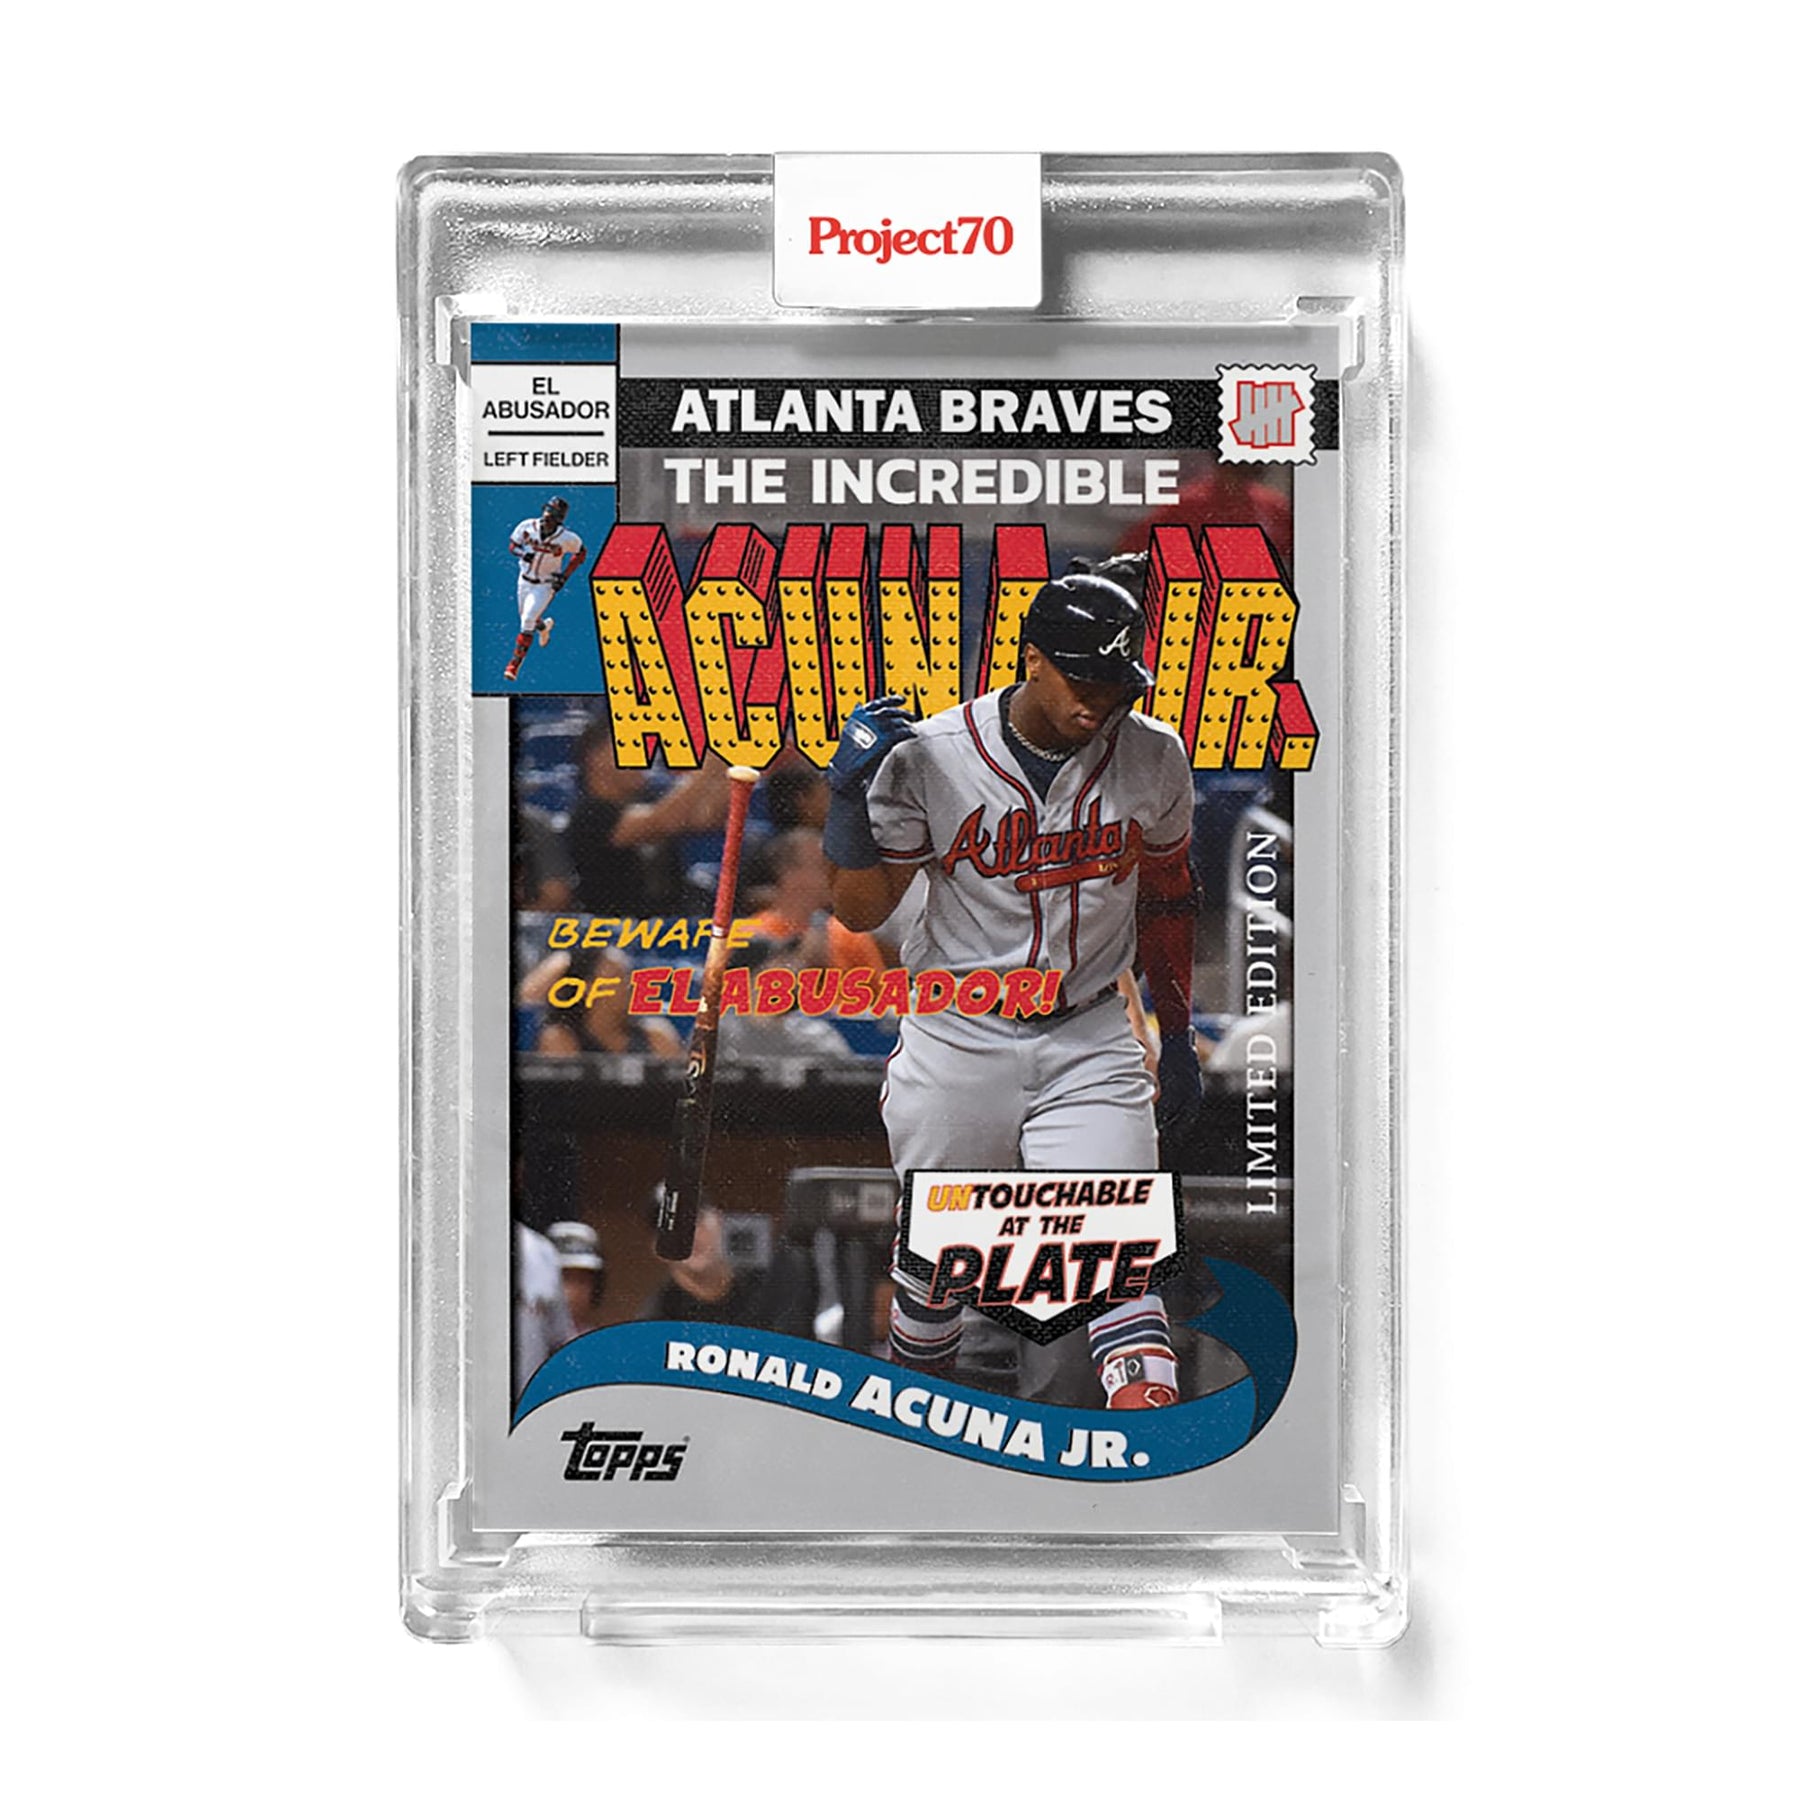 MLB Topps Project70 Card 286 | 2002 Ronald Acuna Jr. by UNDEFEATED